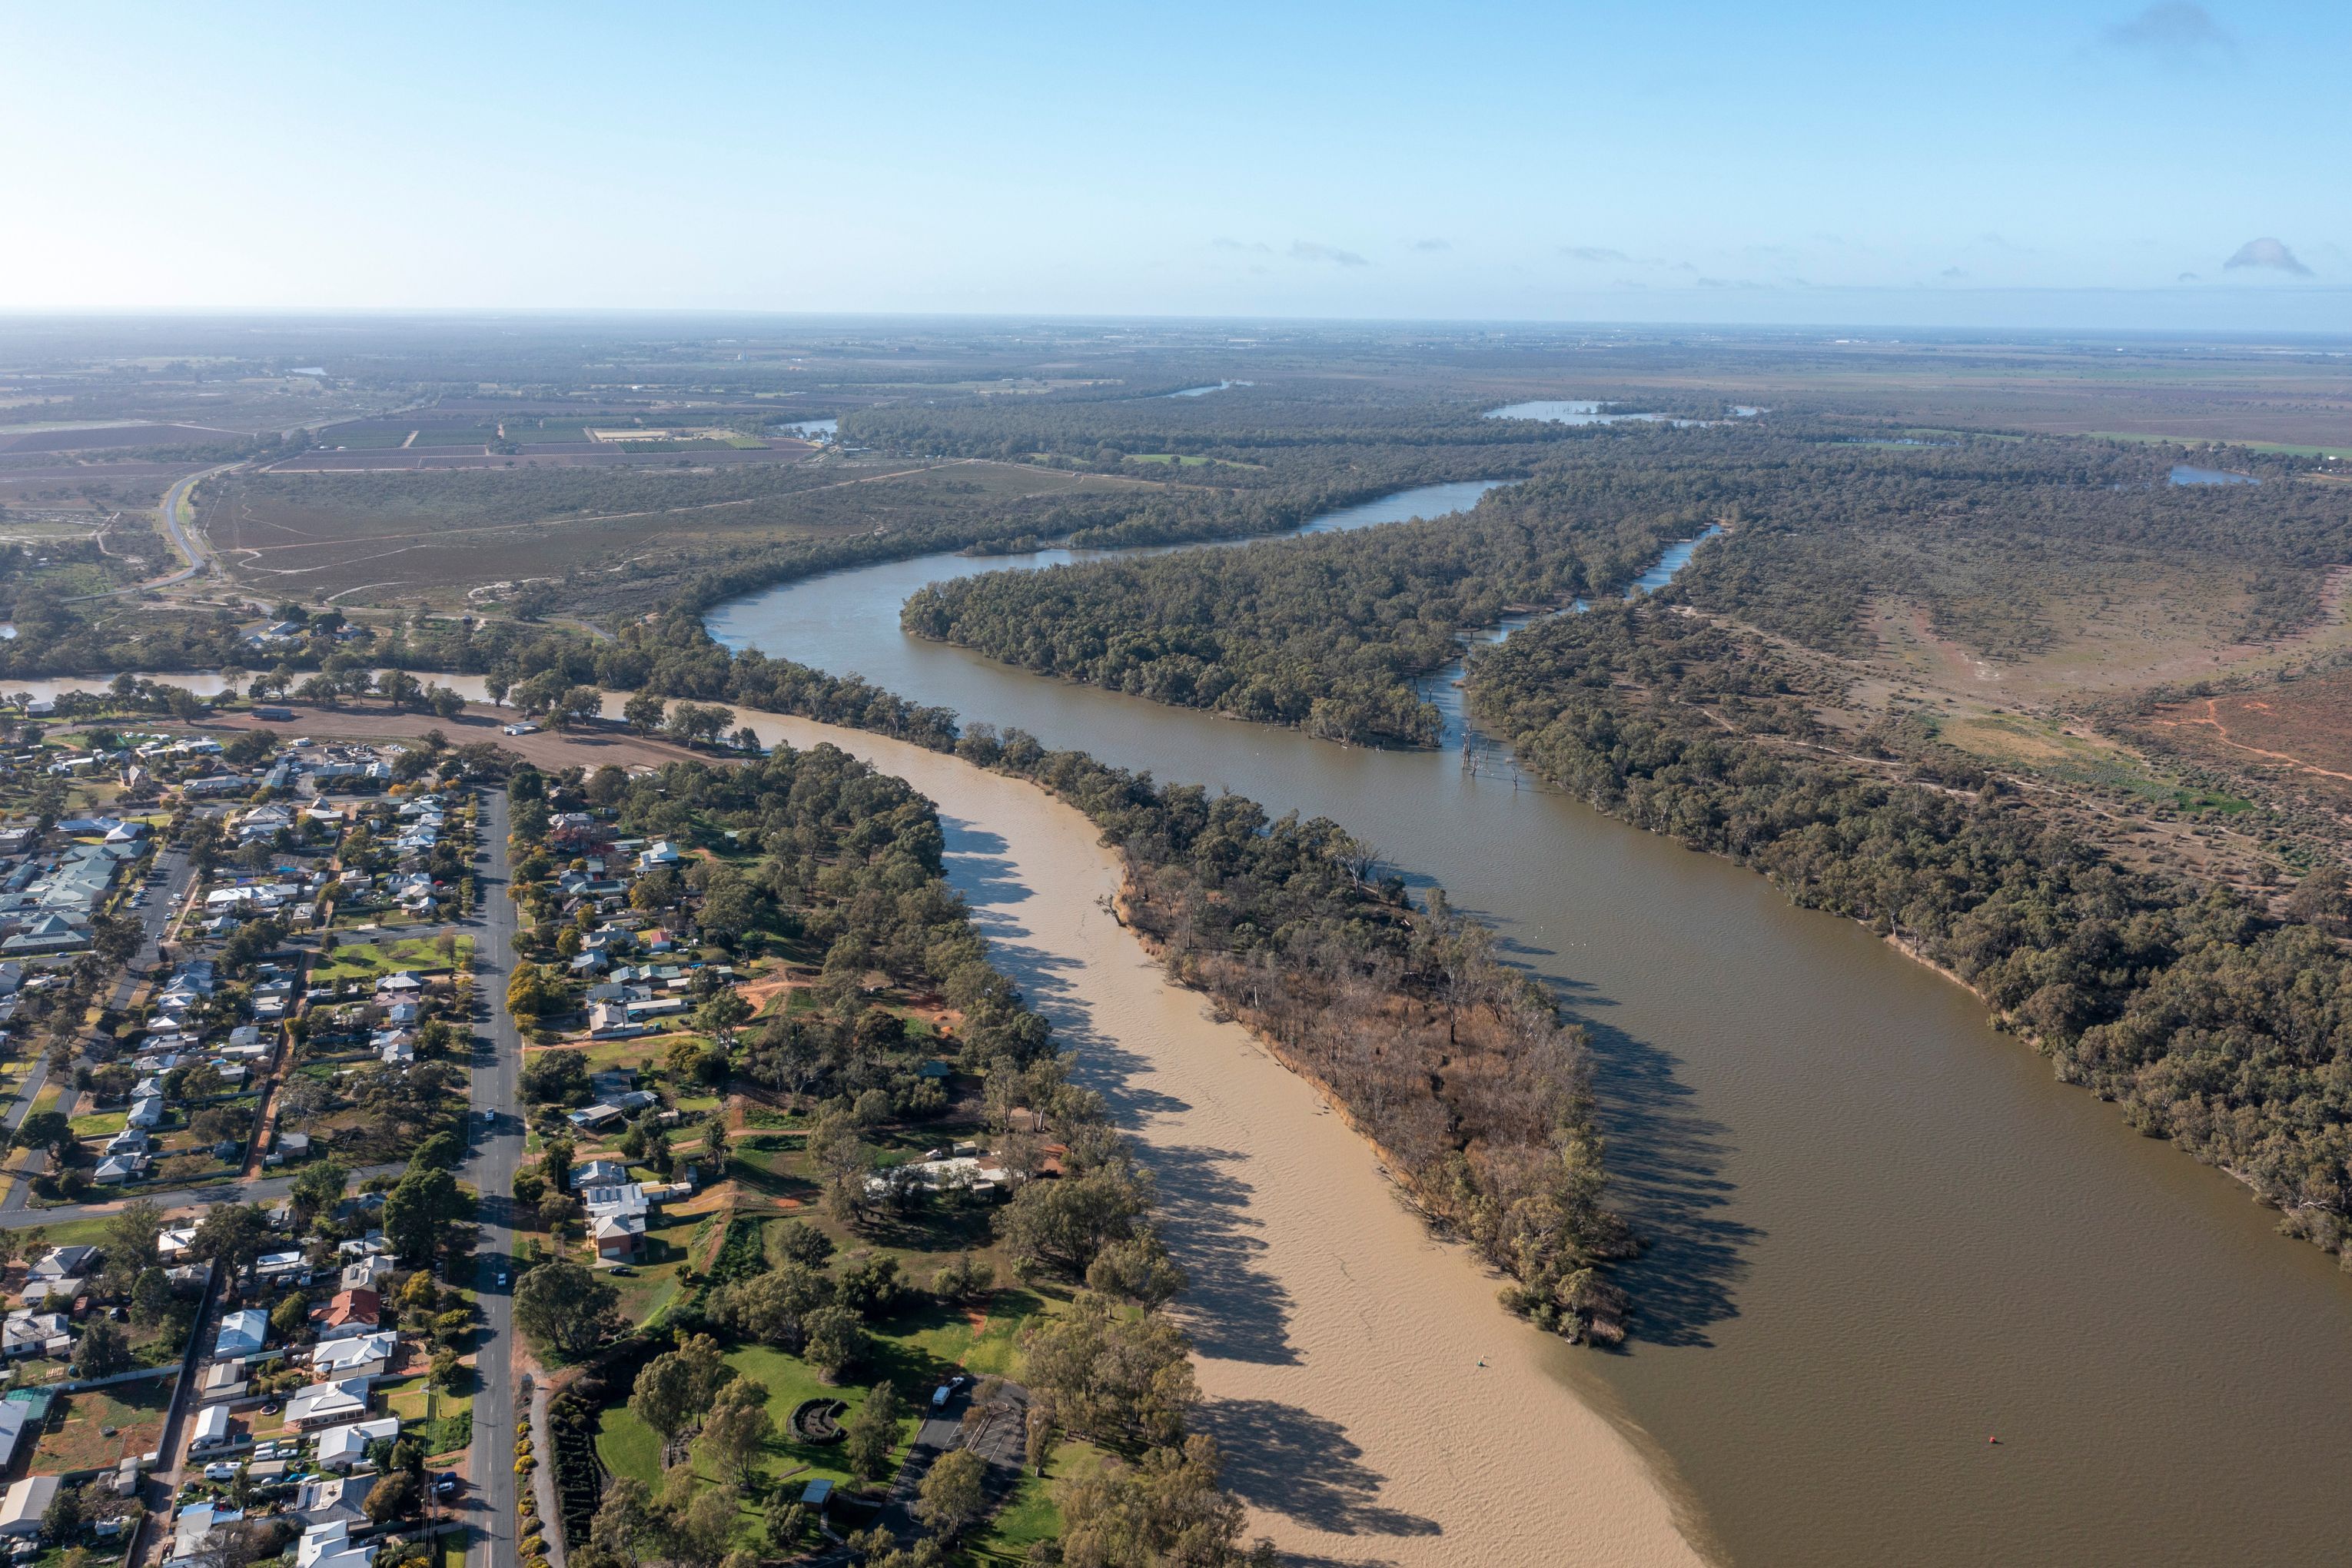 Aerial image of the Darling and Murray Rivers near Wentworth